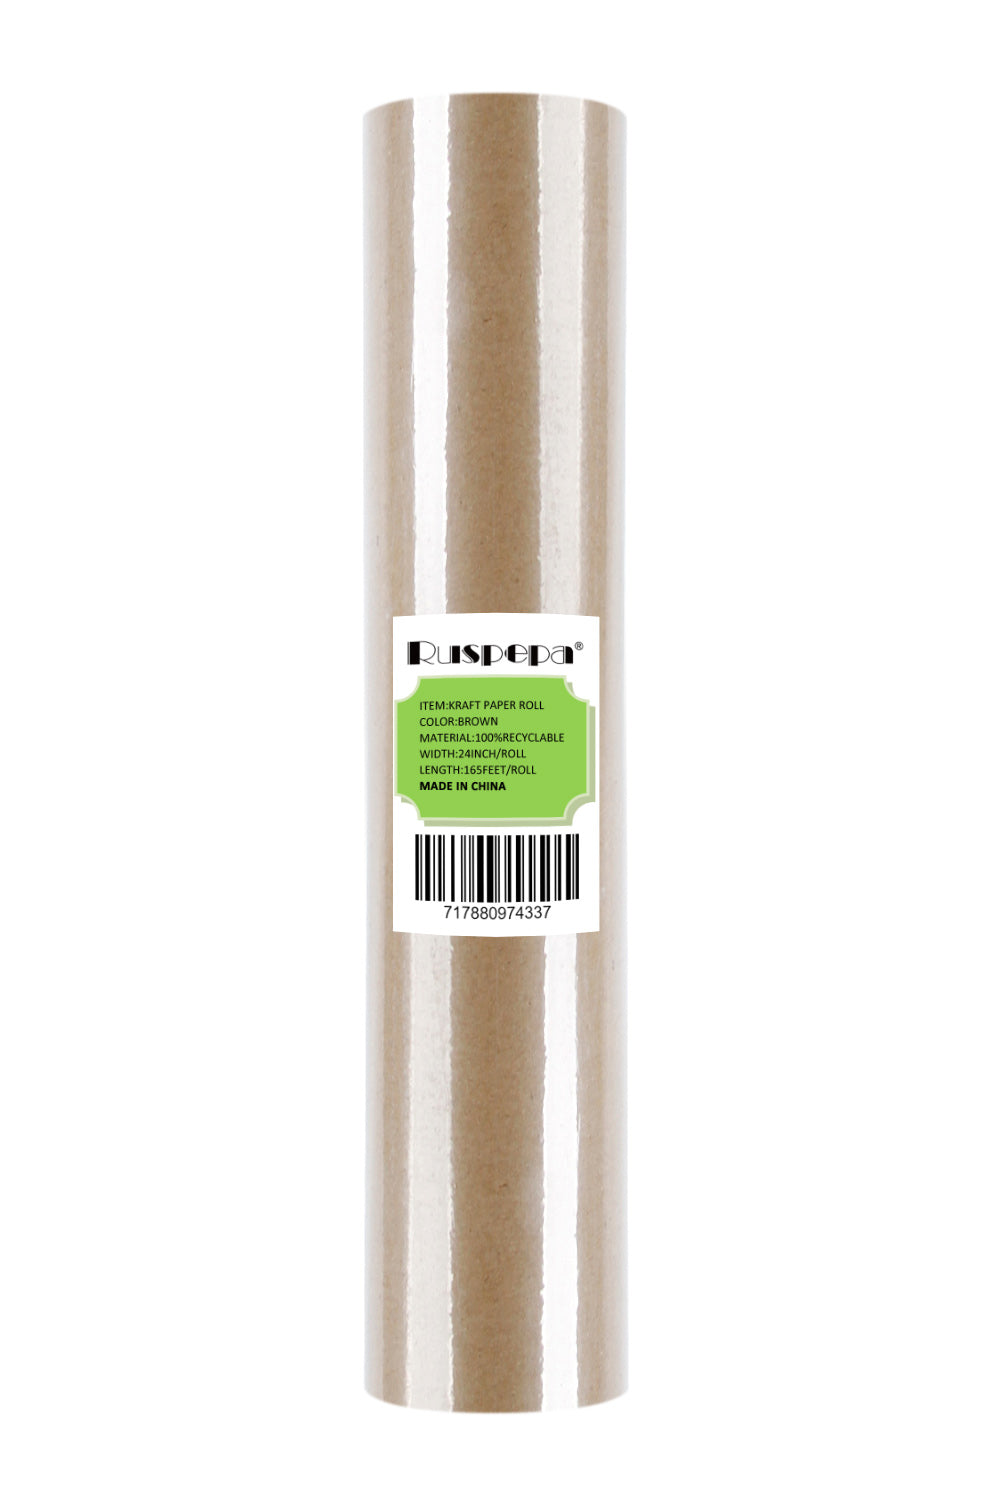 Kraft Brown Wrapping Paper Roll 24 x 1 800 (150 ft) 100